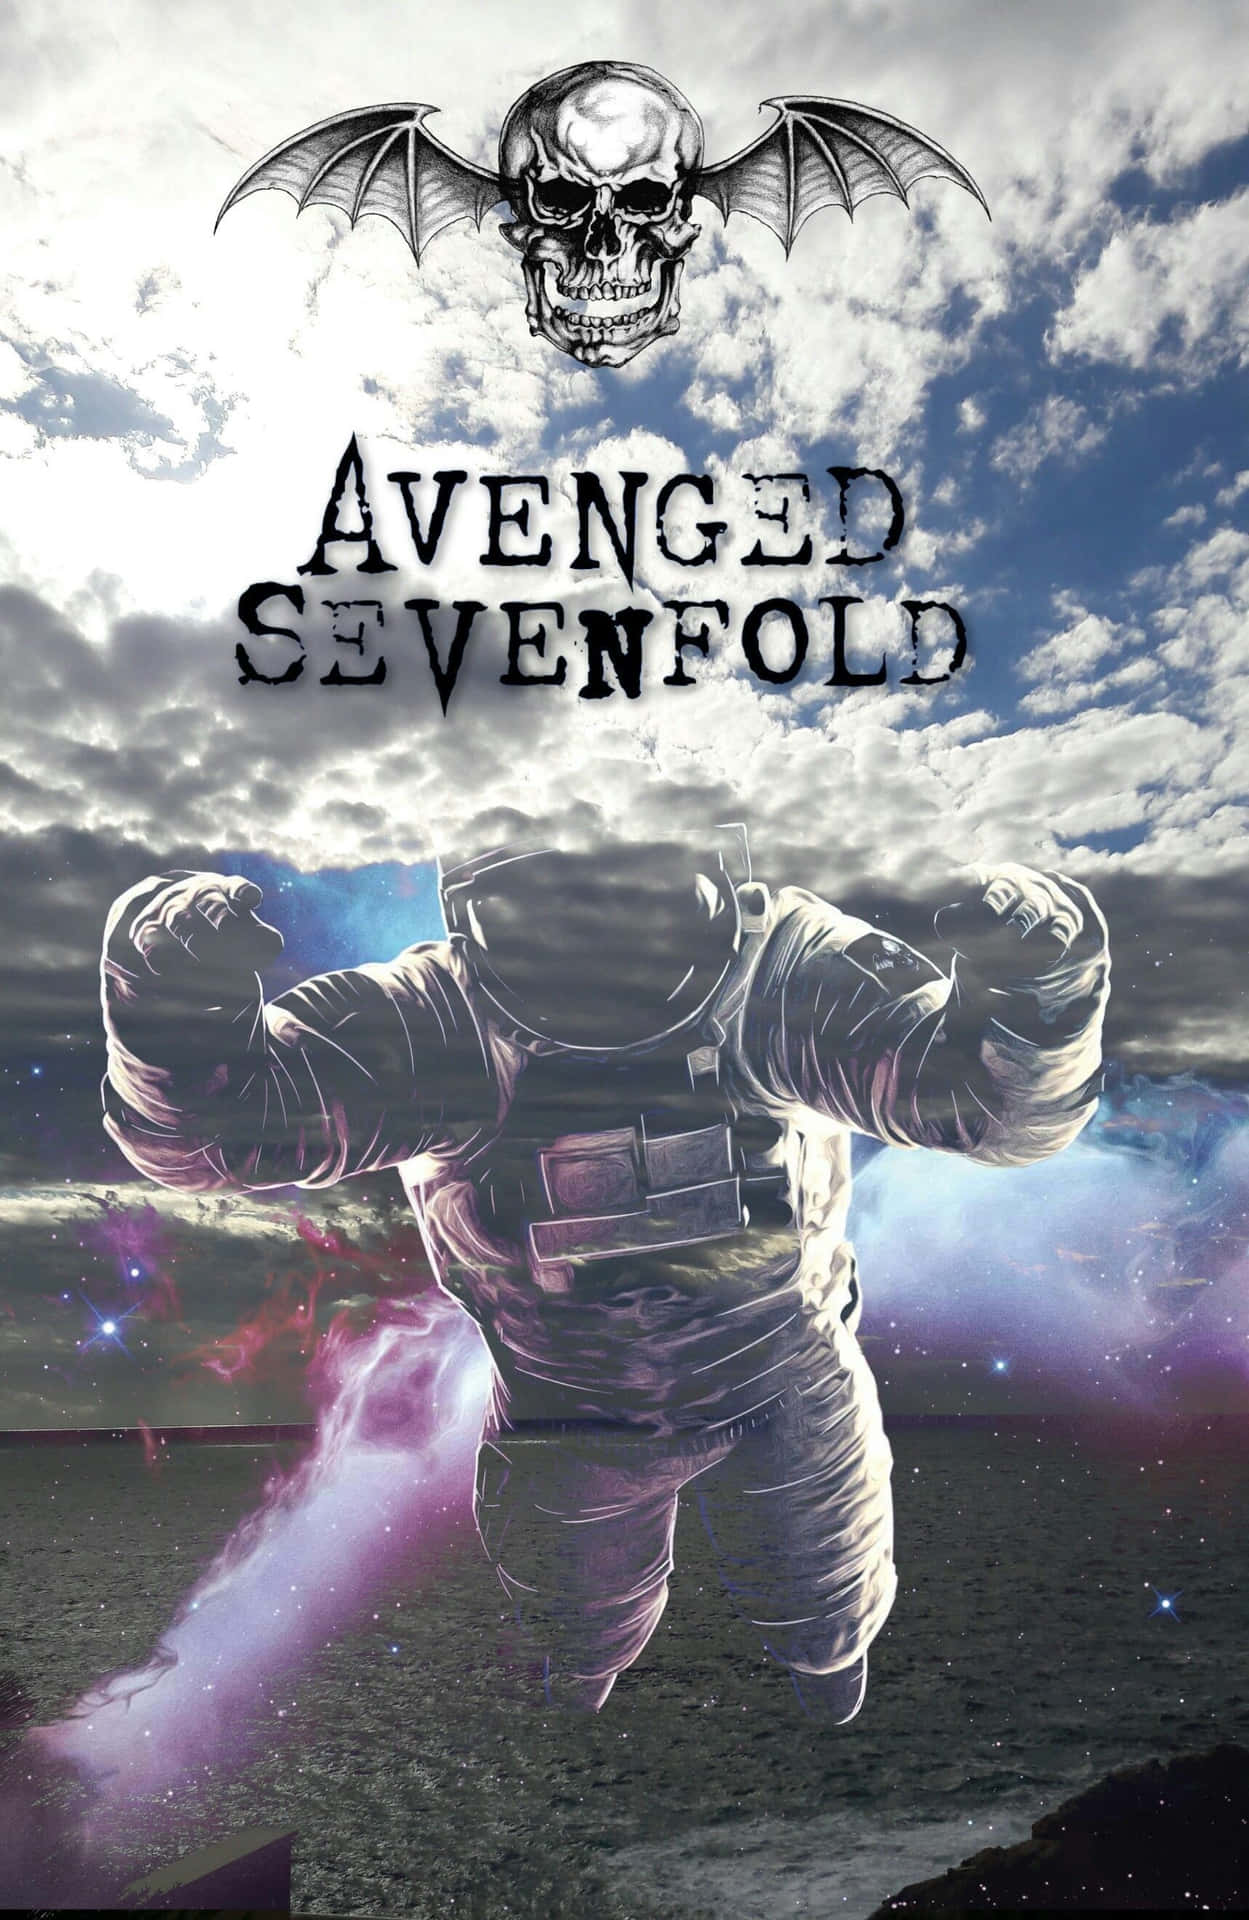 A shot of Avenged Sevenfold, the popular heavy metal band Wallpaper